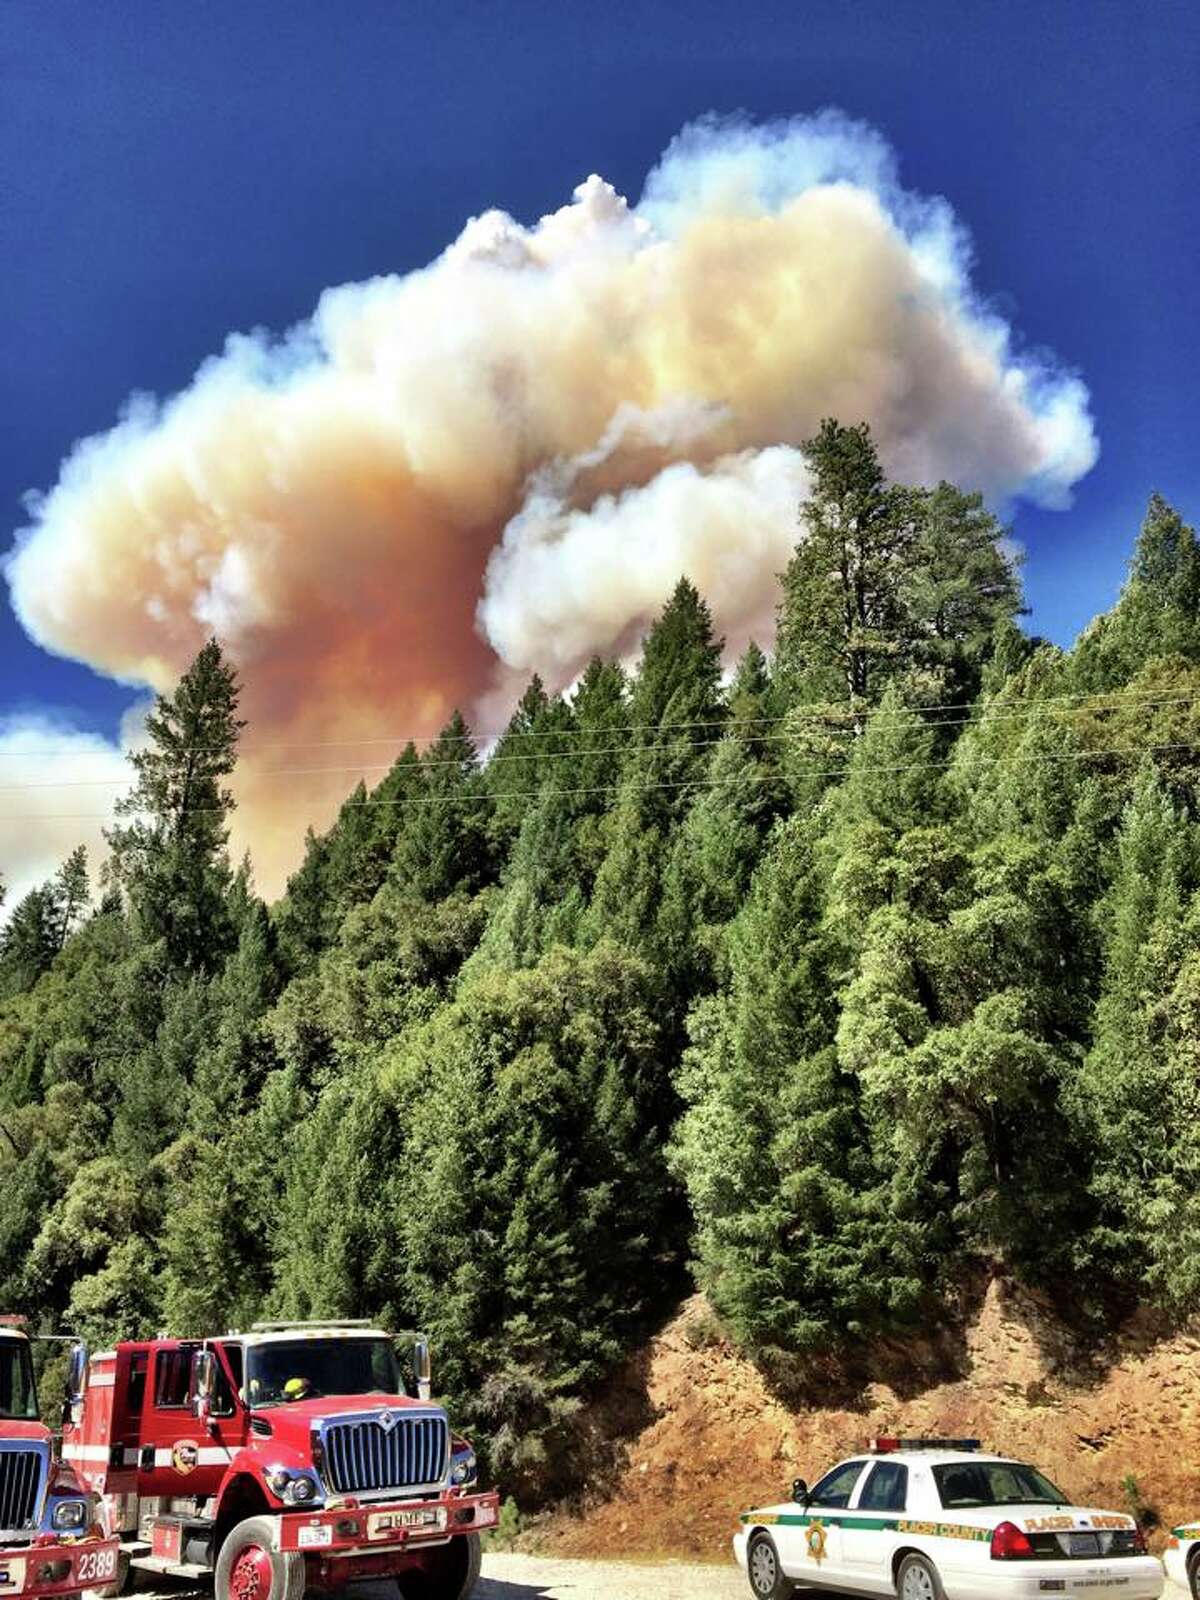 The Lowell Fire in Nevada County had burned 1,700 acres by Monday morning.